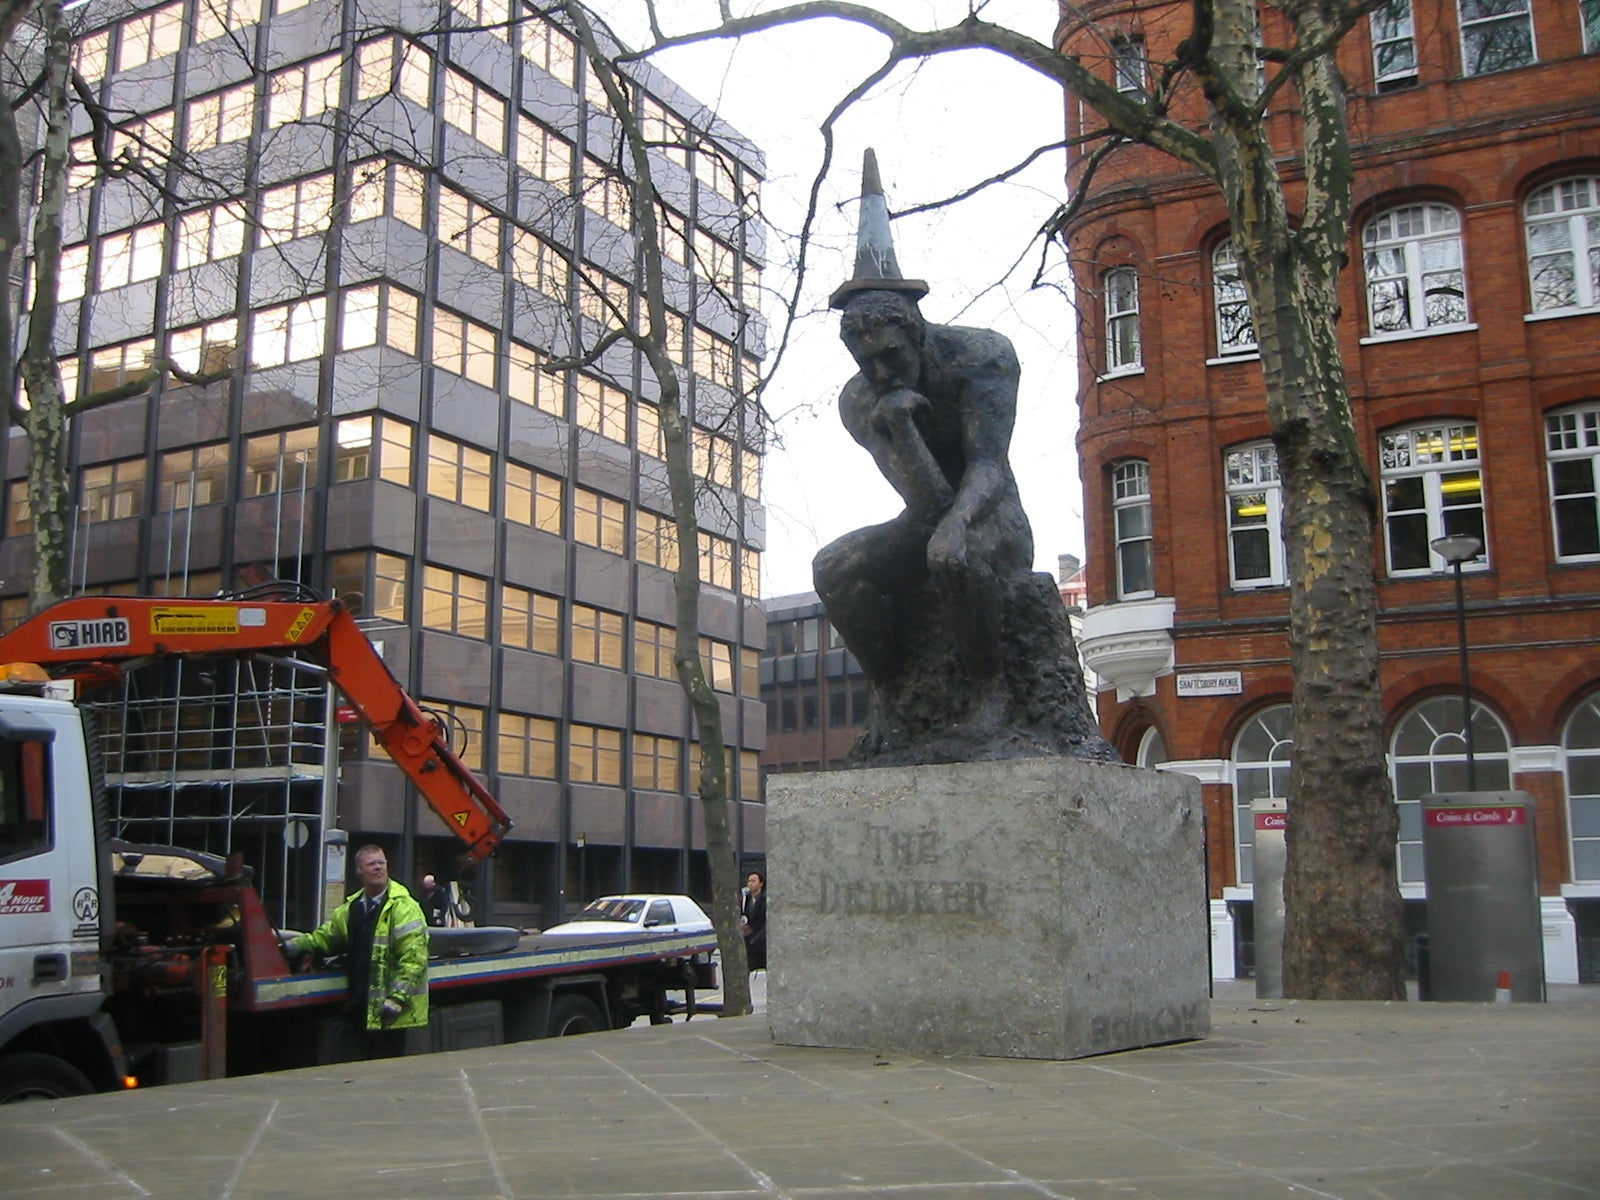 Andy Link, the head of a rebellious art group called Art Kieda, ‘kidnapped’ the piece from its plinth in 2004